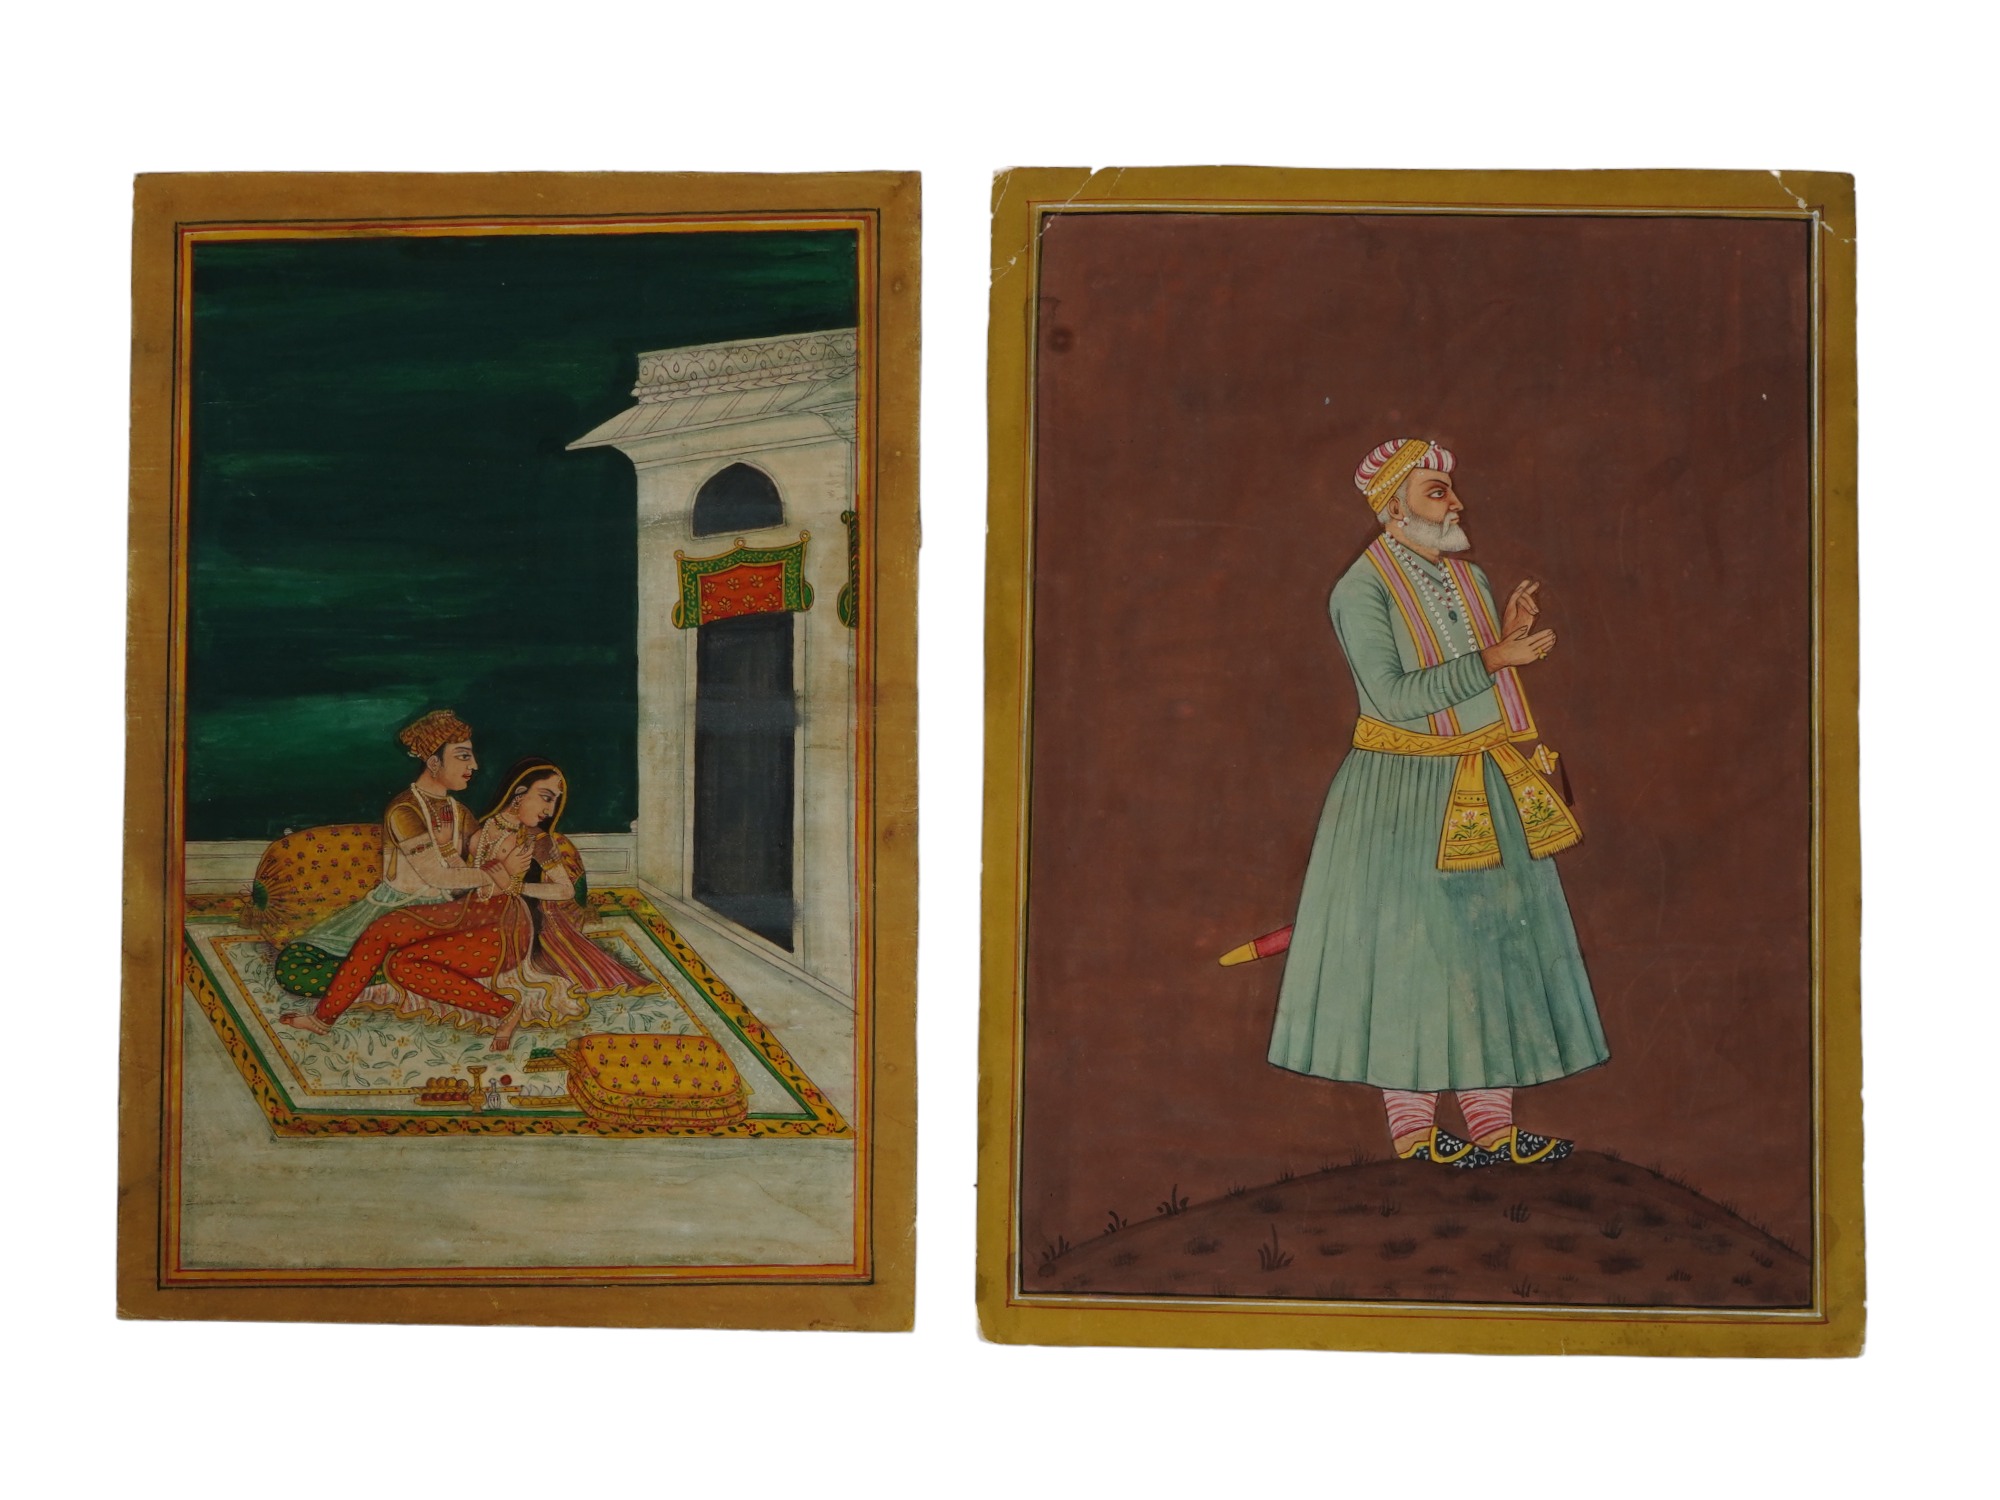 ANTIQUE INDIAN MUGHAL EMPIRE MINIATURE PAINTINGS PIC-2